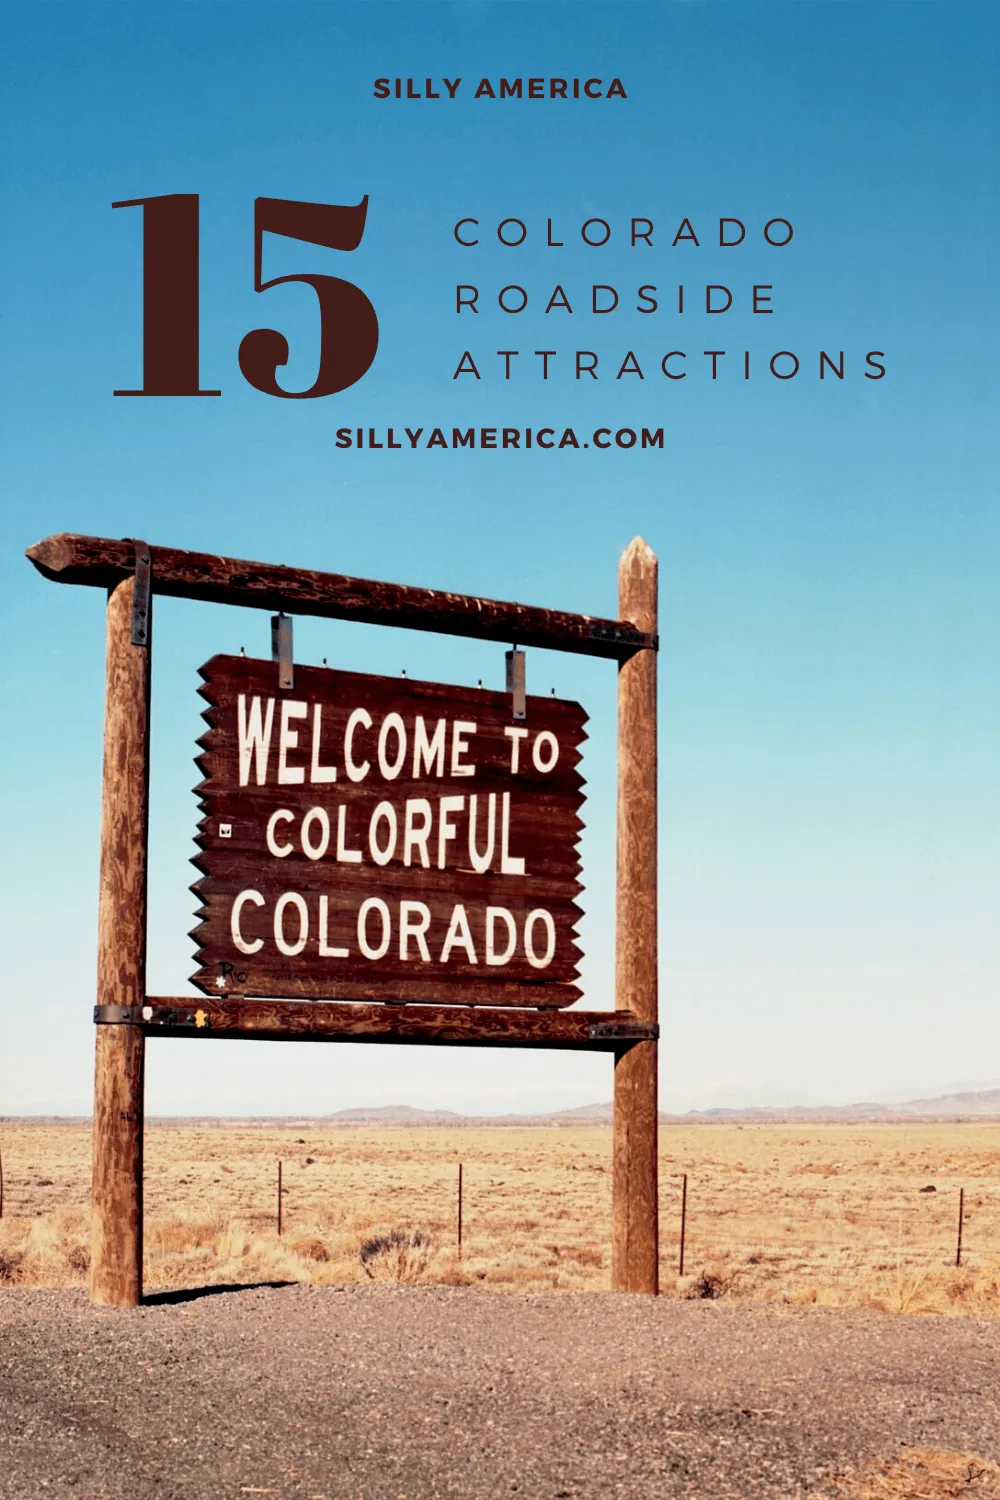 The best Colorado roadside attractions to visit on a Colorado road trip. Add these roadside oddities to your travel bucket list, itinerary, or route map! Weird roadside attractions and fun road trip stops for kids or adults in Denver and beyond. #ColoradoRoadsideAttractions #ColoradoRoadsideAttraction #RoadsideAttractions #RoadsideAttraction #ColoradoRoadTrip #ColoradoSummerRoadTrip #ColoradoRoadTripMap #ColoradoRoadTripItinerary #ColoradoWinterRoadTrip #WeirdRoadsideAttractions